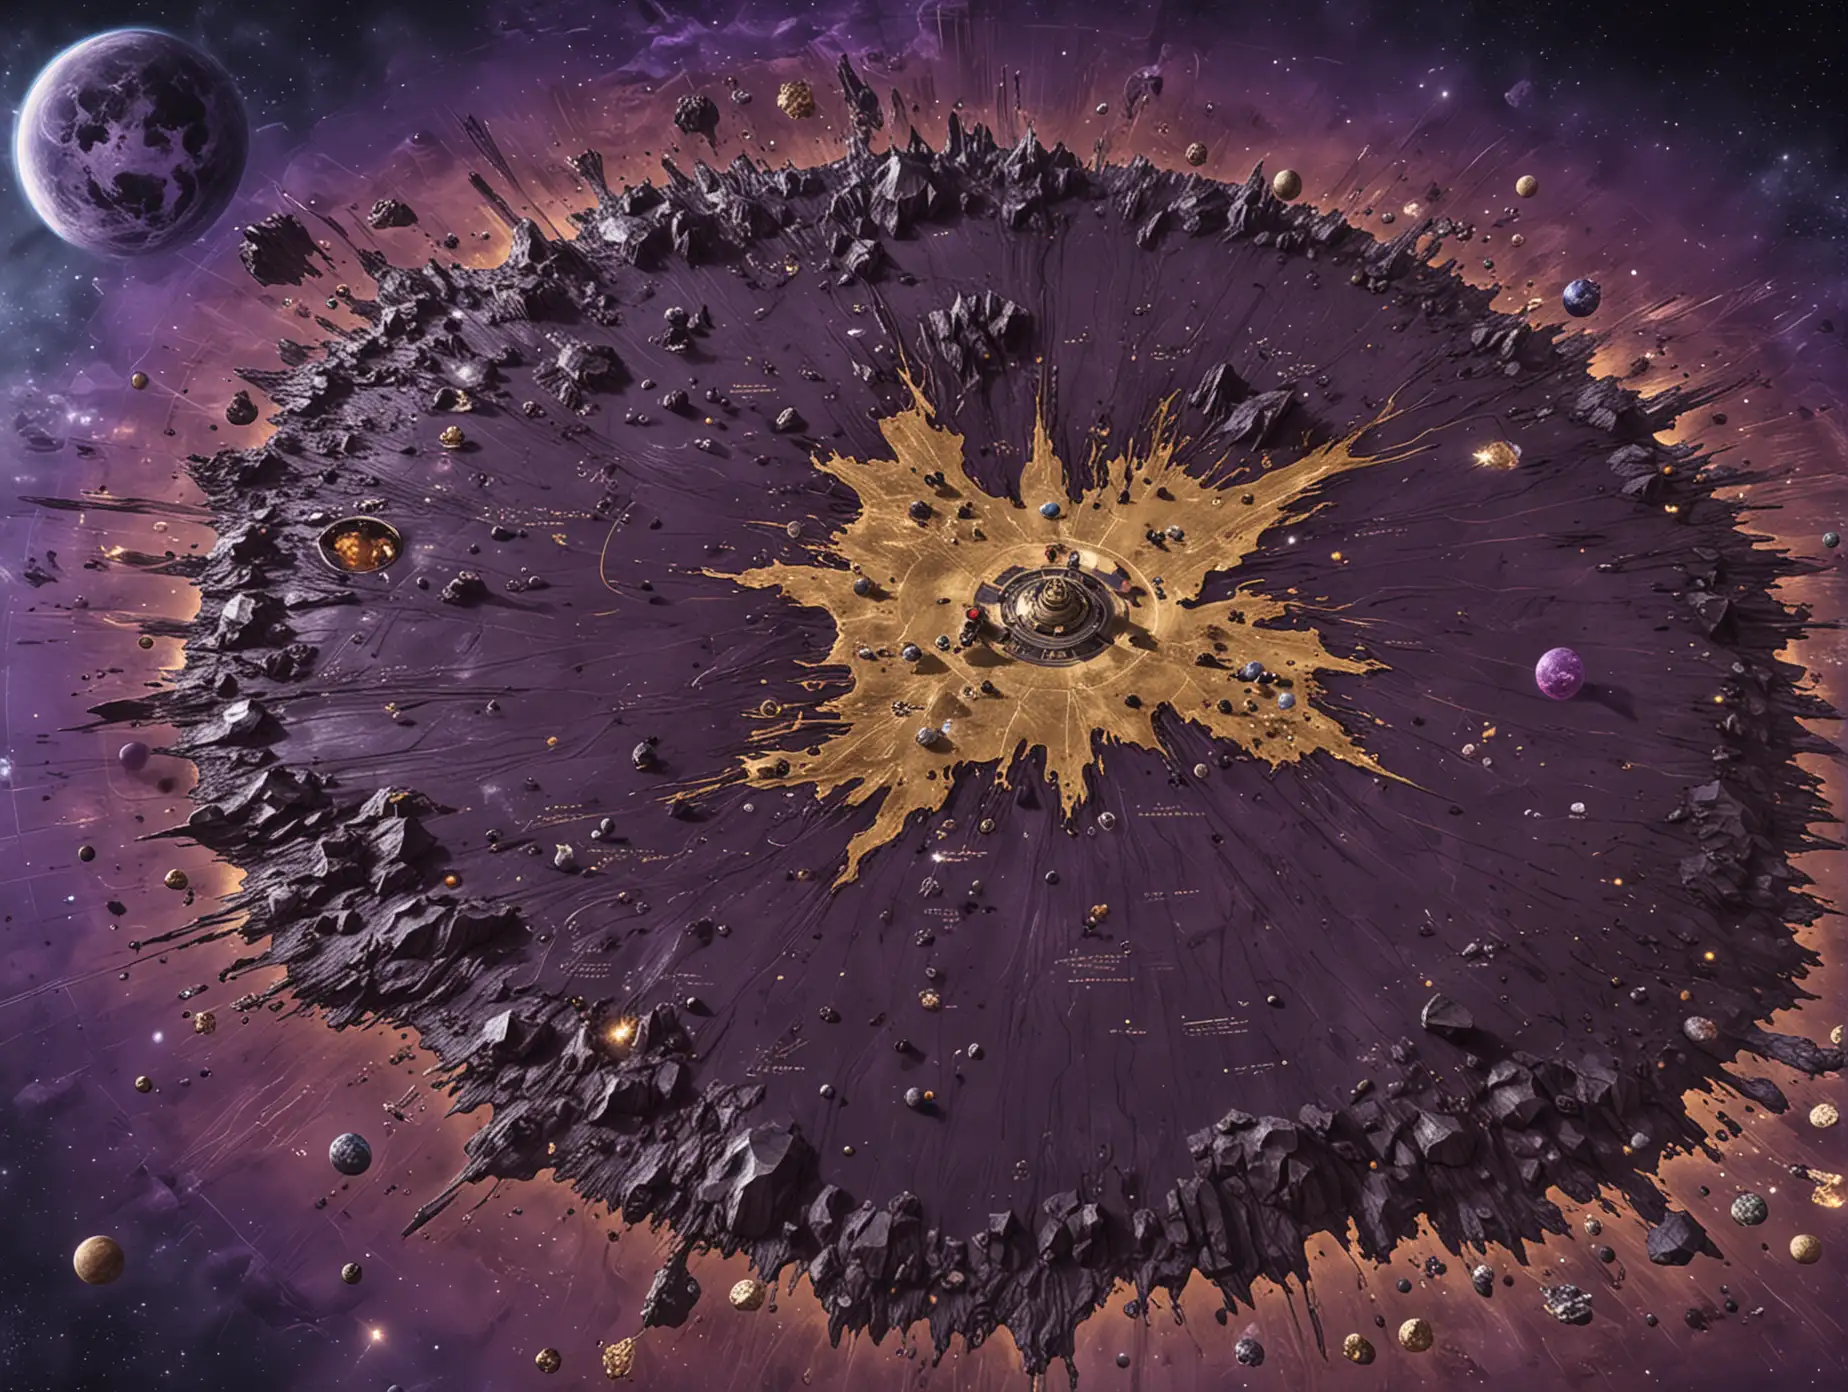 A Very huge unexplored abadoned Black-purple Planet's huge map without subtitles and signs. The map's from the total top.
The map is abadoned and extinct, The map's majority is PLAIN but some ore and gold sites can be found on the map. There's a little tech base in the middle